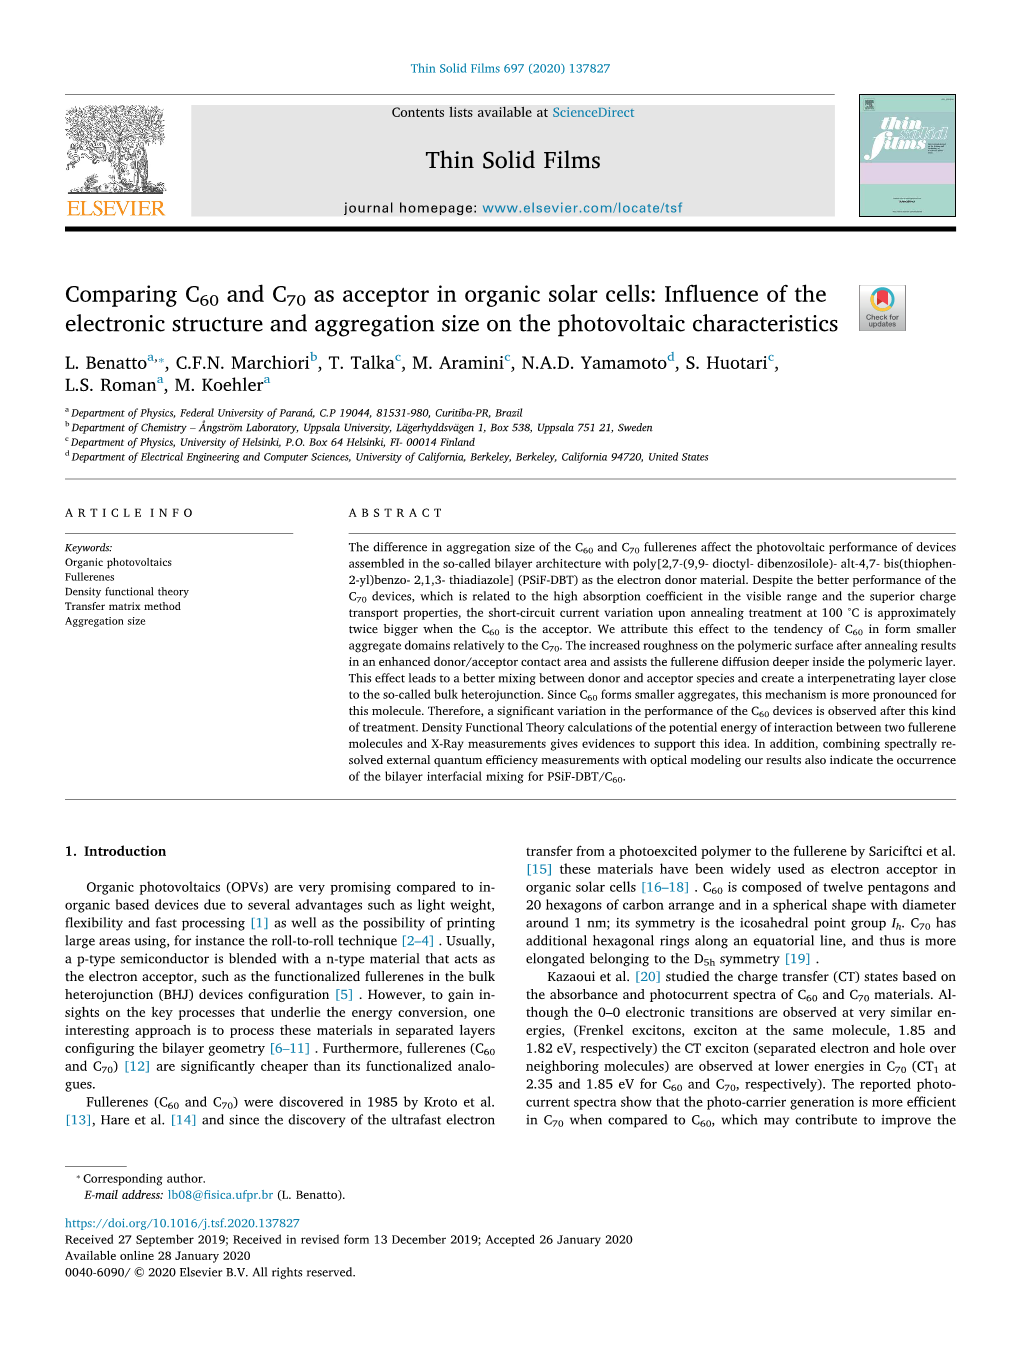 Comparing C60 and C70 As Acceptor in Organic Solar Cells Influence of the Electronic Structure and Aggregation Size on the Phot